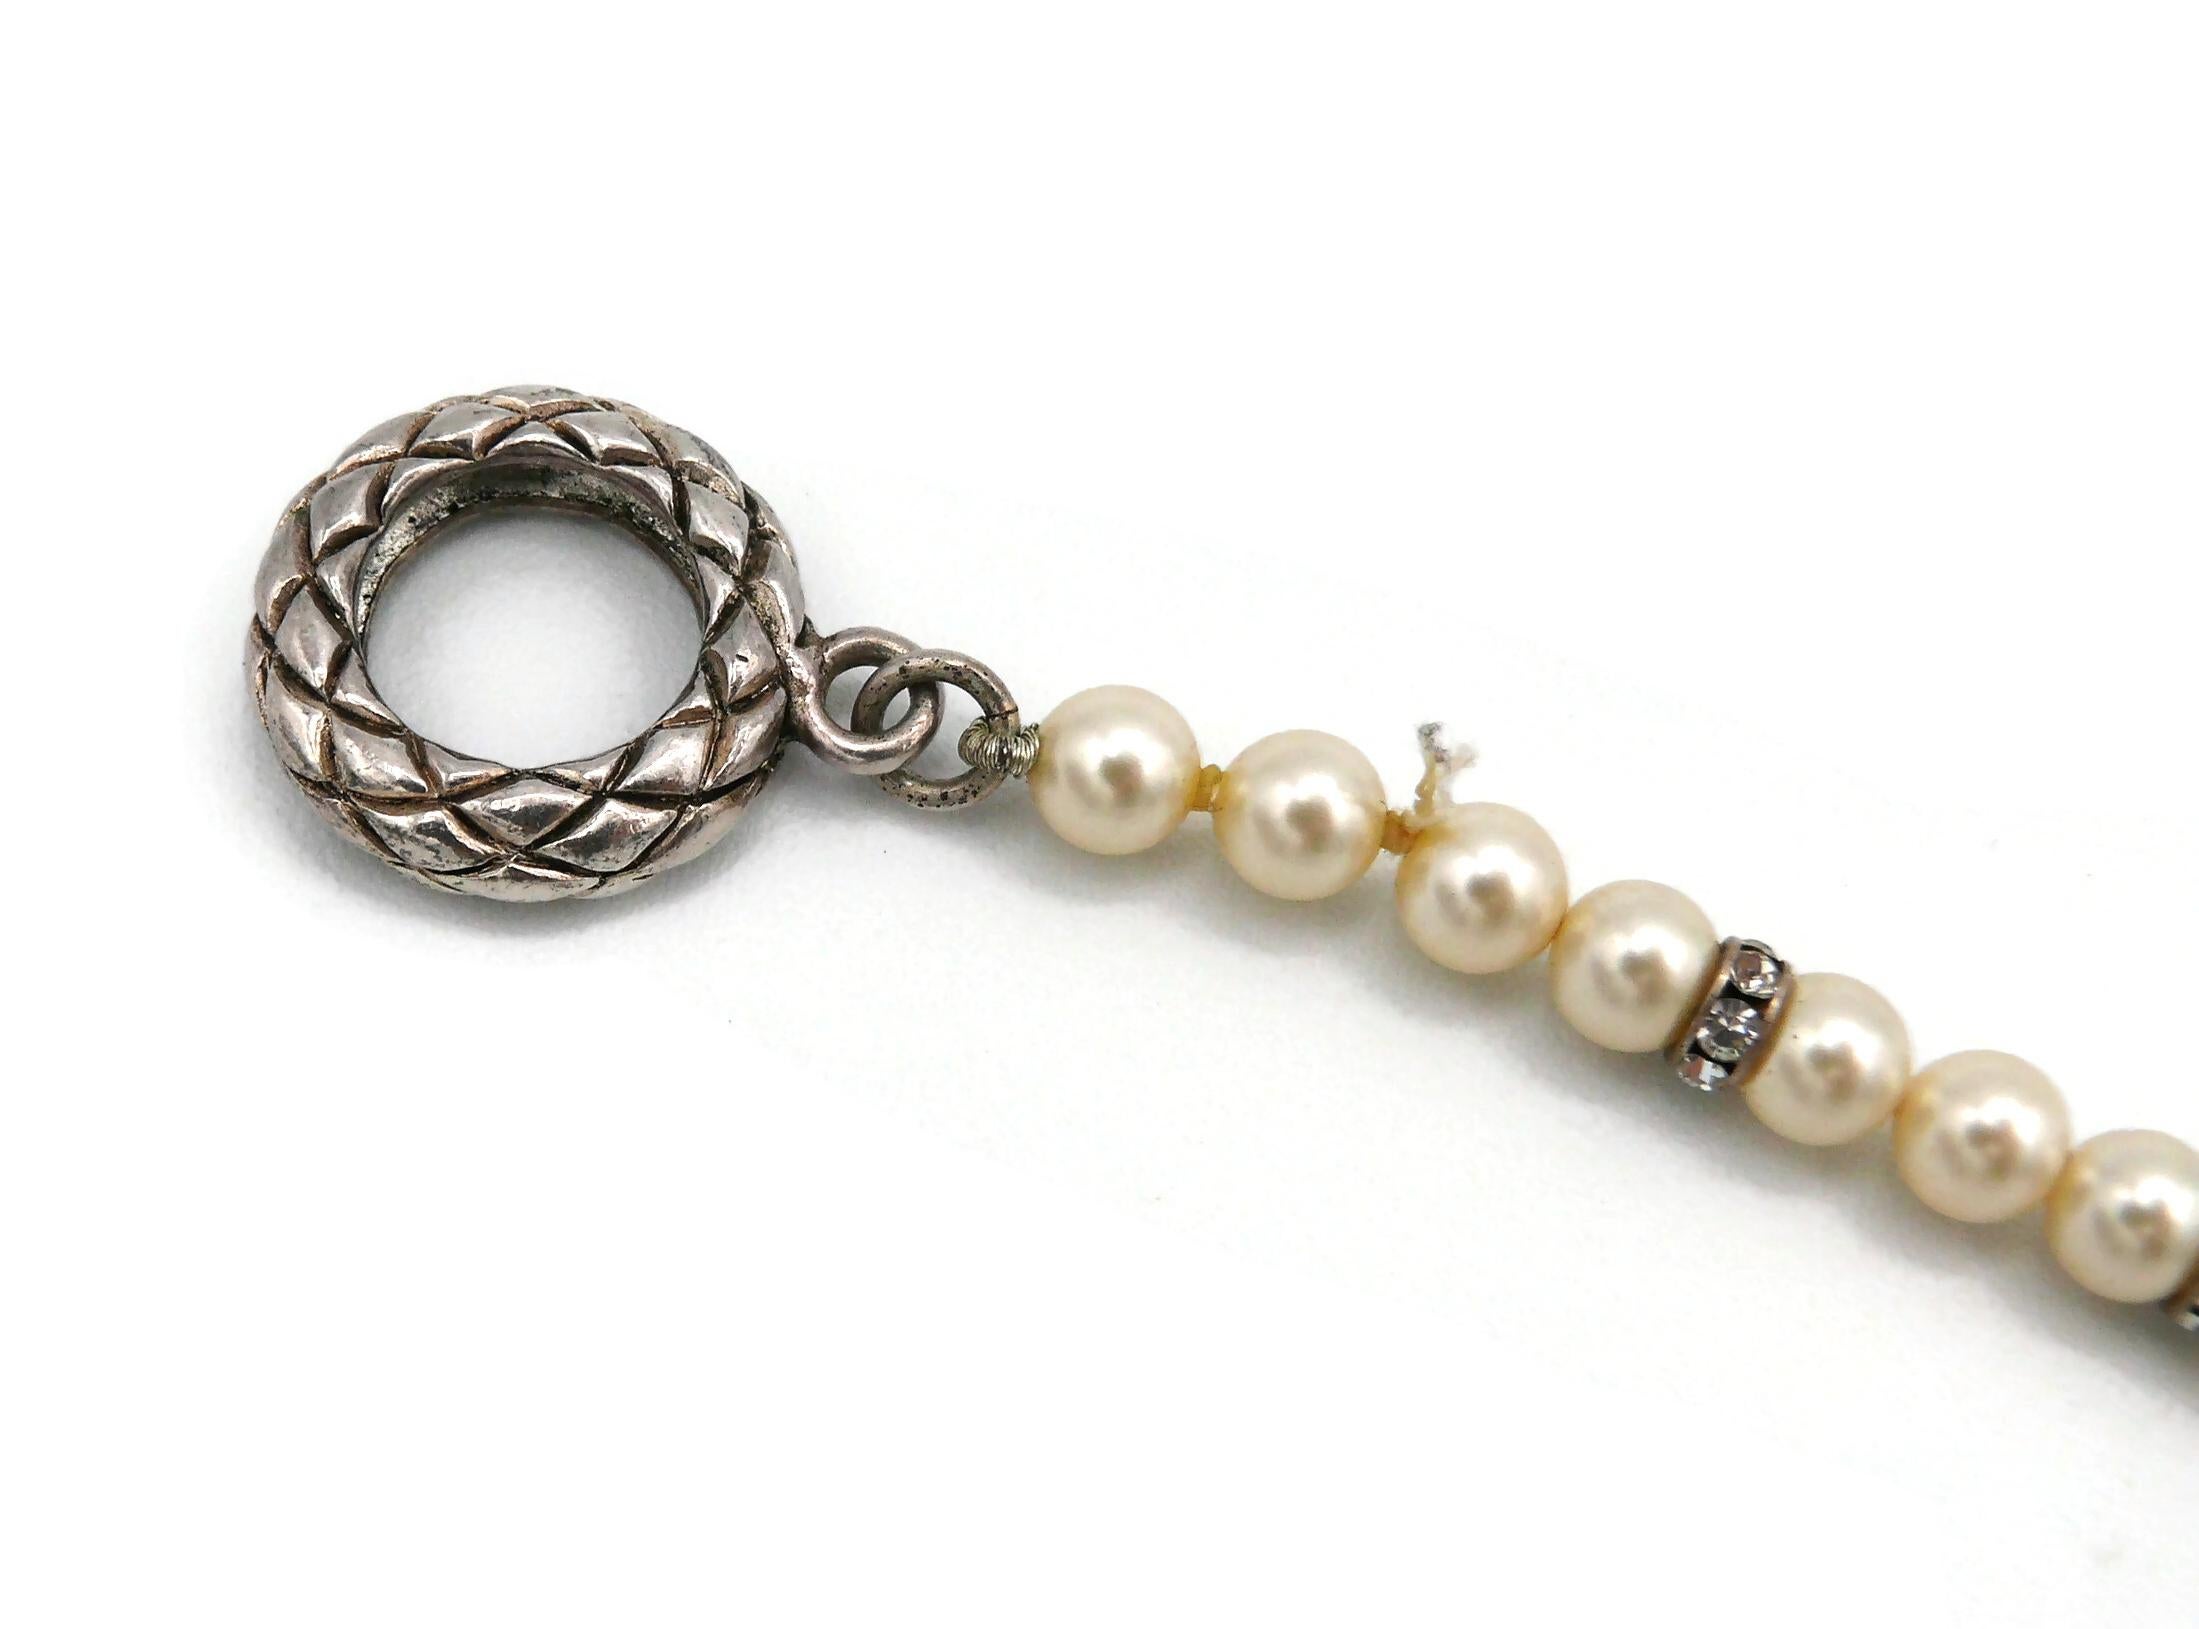 Women's CHANEL by KARL LAGERFELD Vintage Faux Pearl and Crystal Necklace, Fall 1993 For Sale